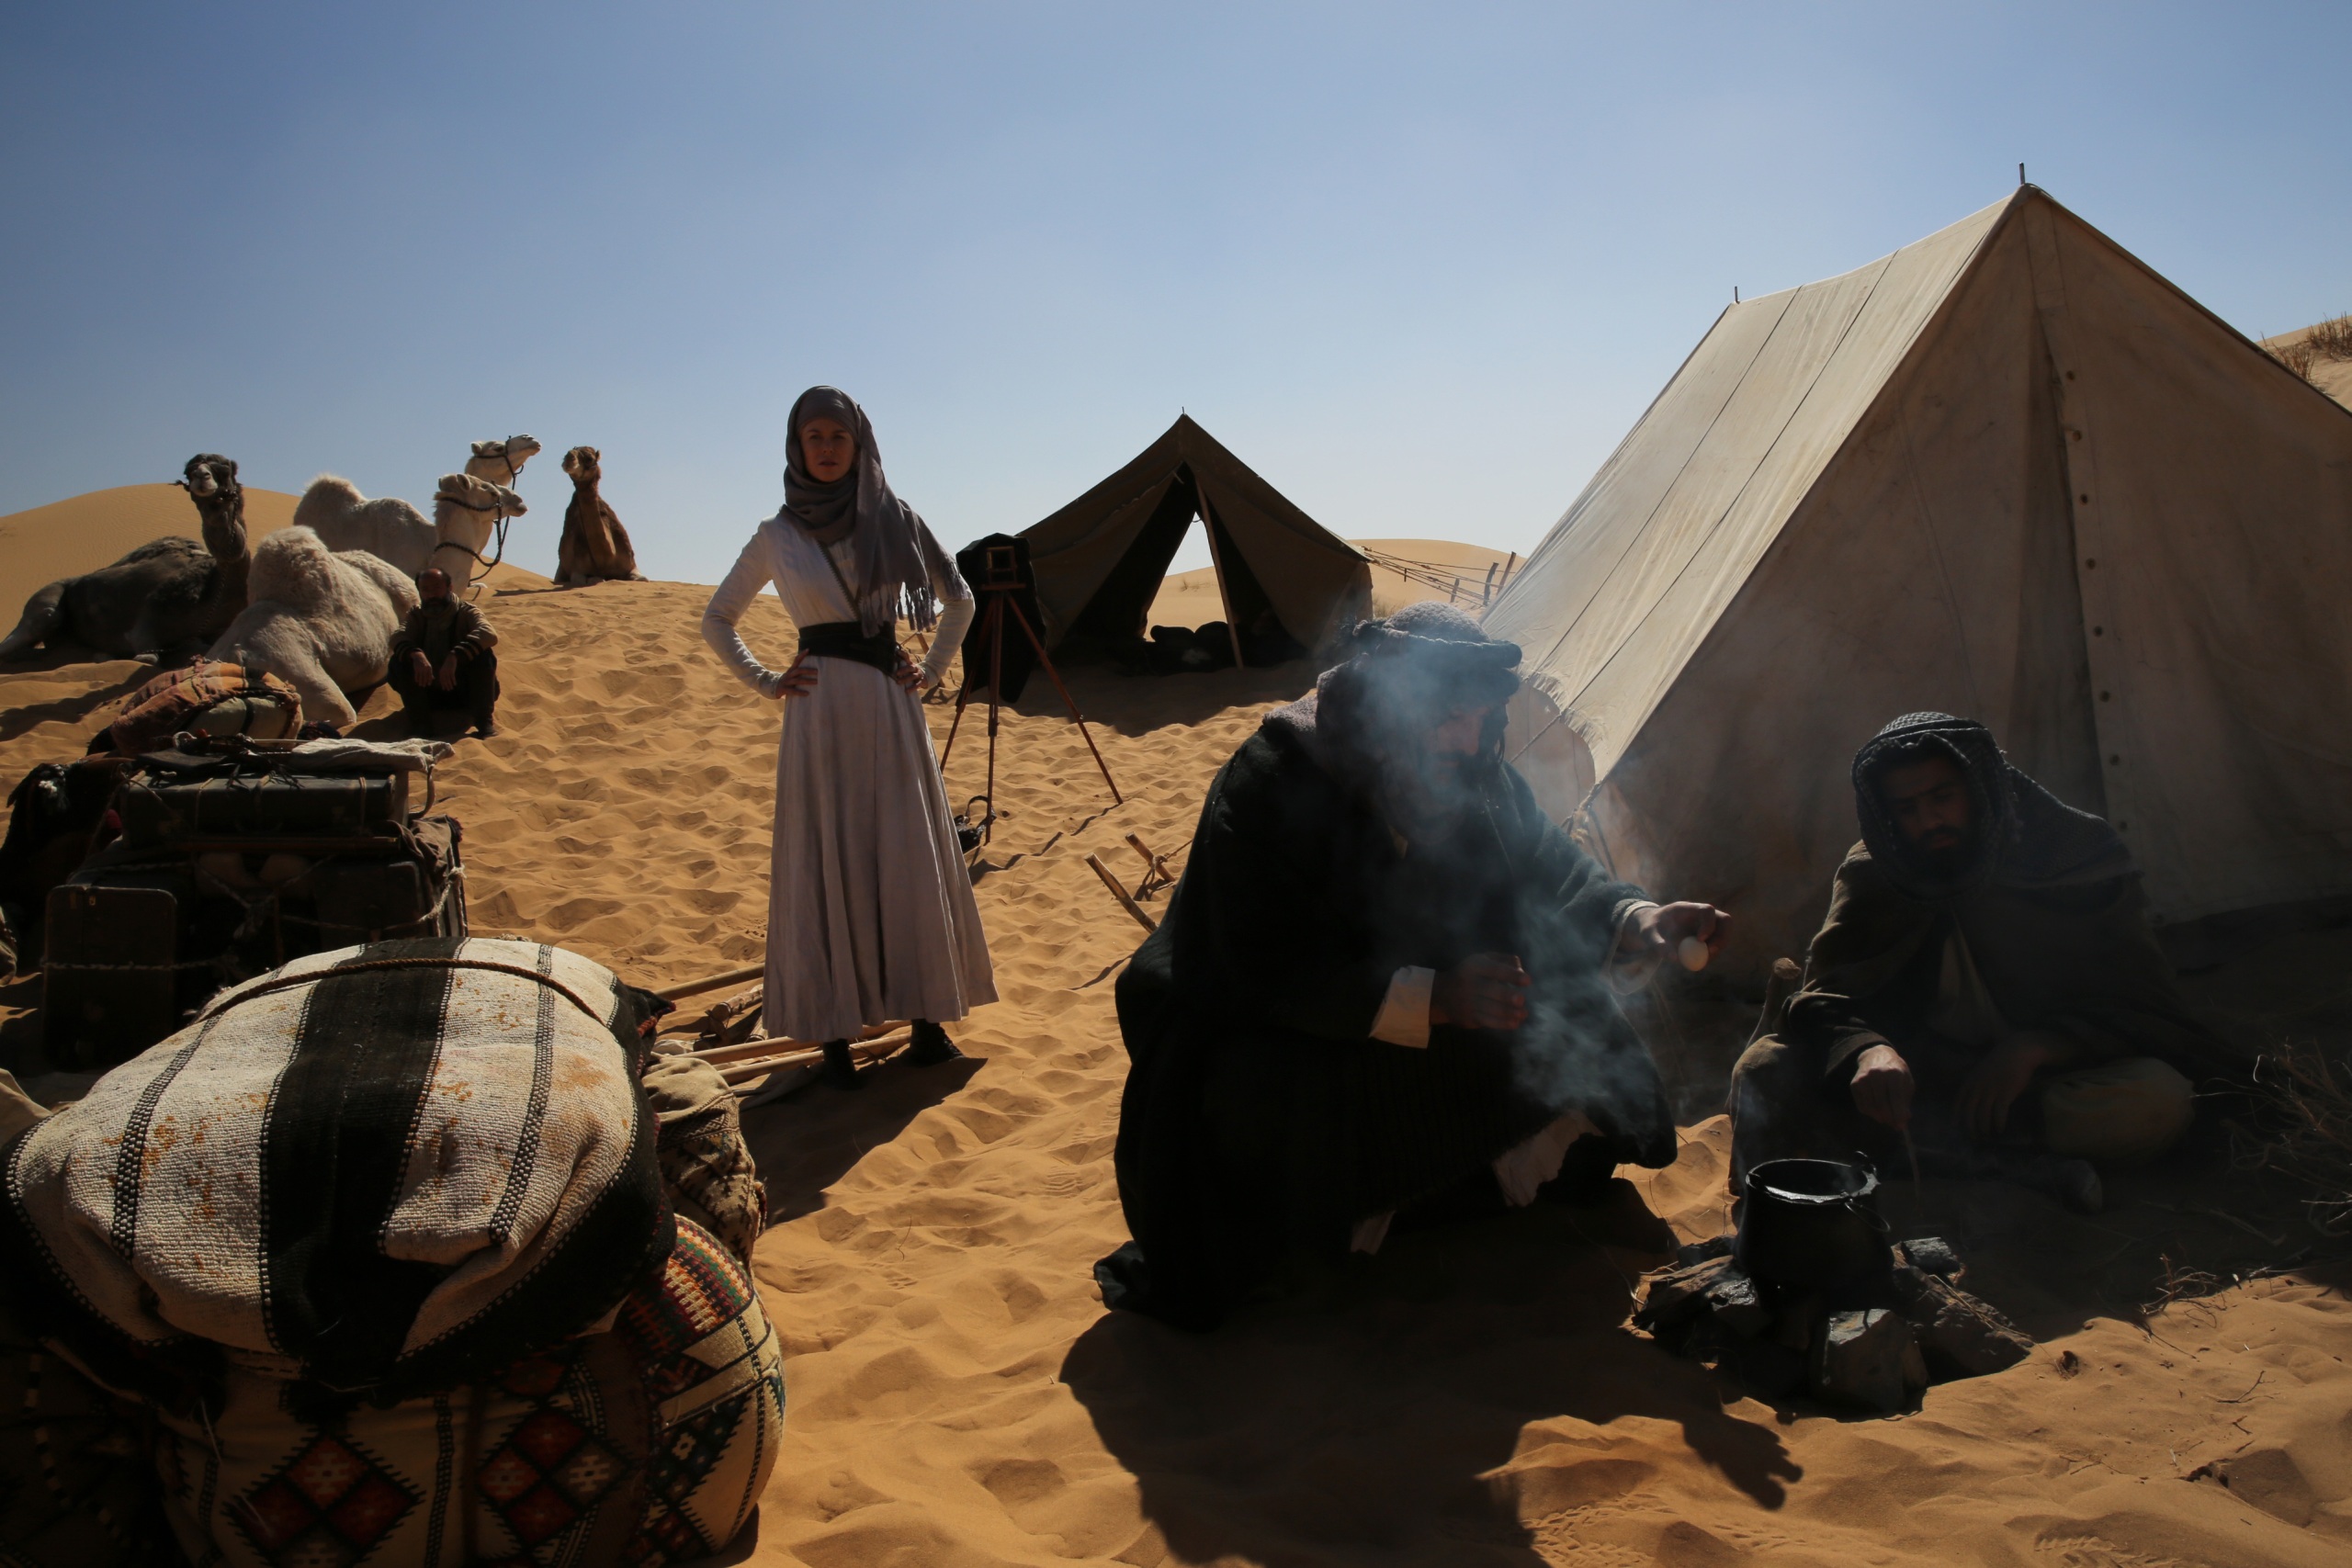 A Bedouin camp in the desert, on the right are two tents, on the left are some camels. In the foreground two people are sitting around a fire, in the background is a woman in a white dress with a dark headscarf.